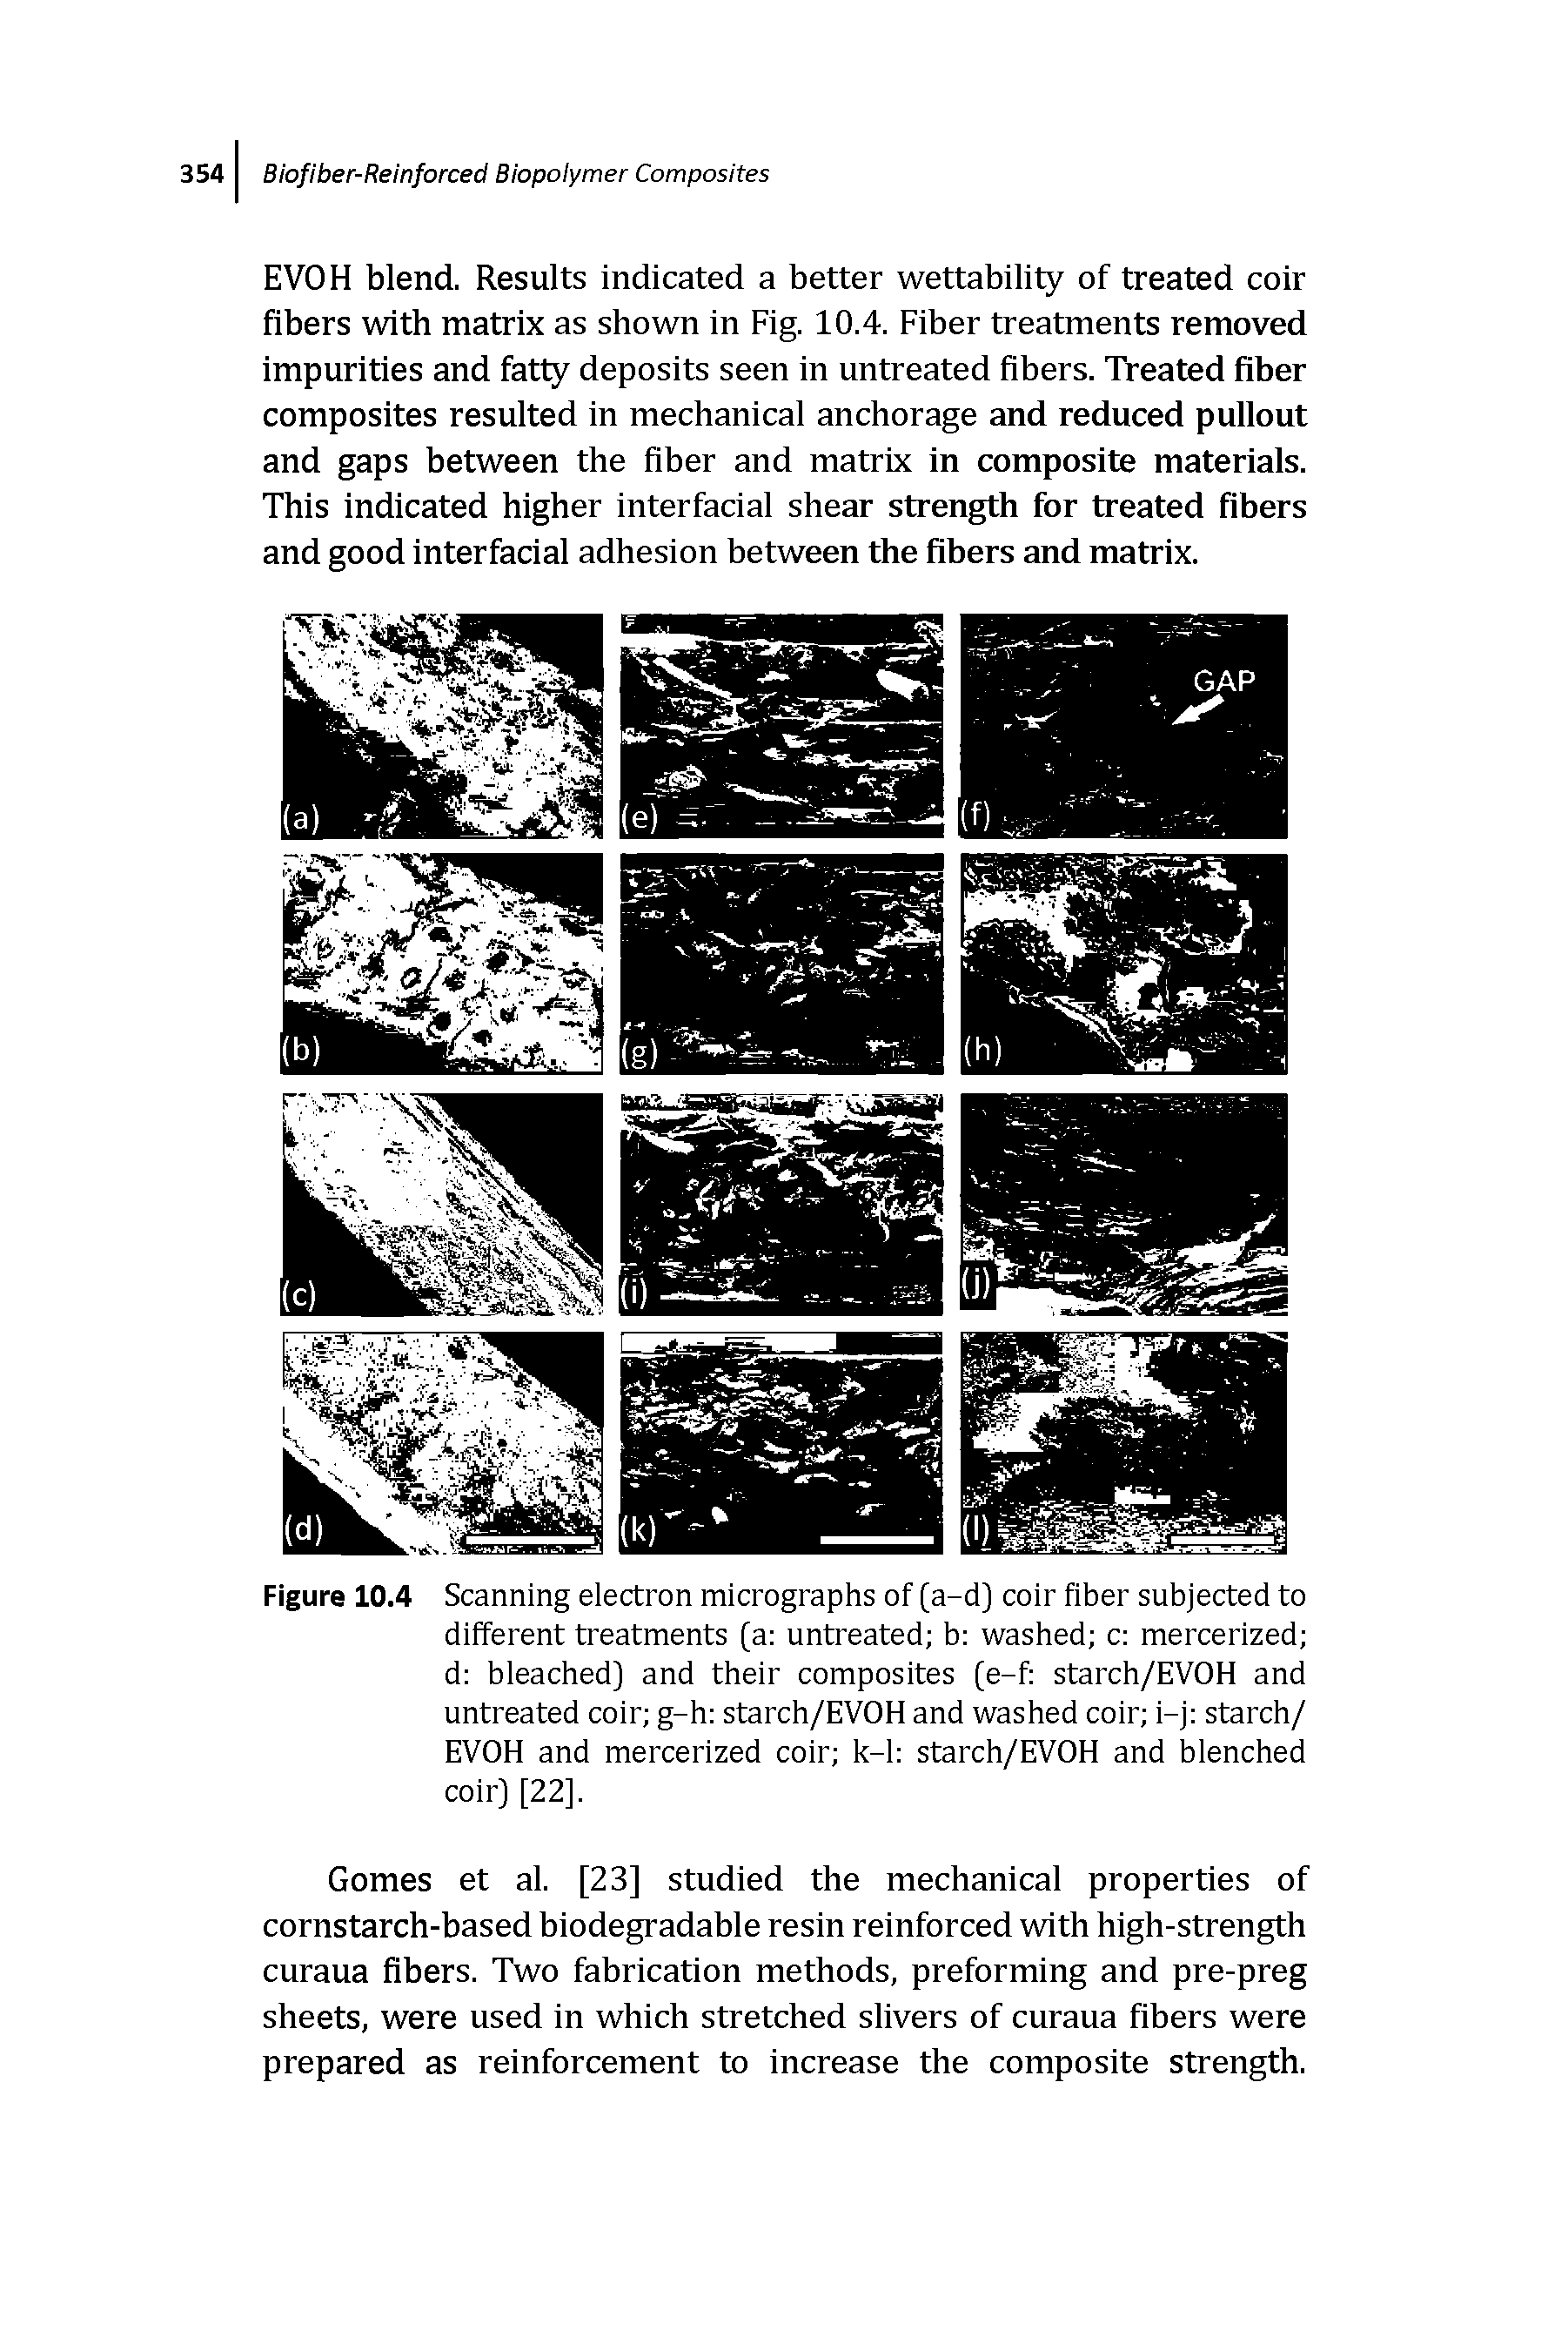 Figure 10.4 Scanning electron micrographs of (a-d] coir fiber subjected to different treatments [a untreated b washed c mercerized d bleached] and their composites [e-f starch/EVOH and untreated coir g-h starch/EVOH and washed coir i-j starch/ EVOH and mercerized coir k-1 starch/EVOH and blenched coir] [22].